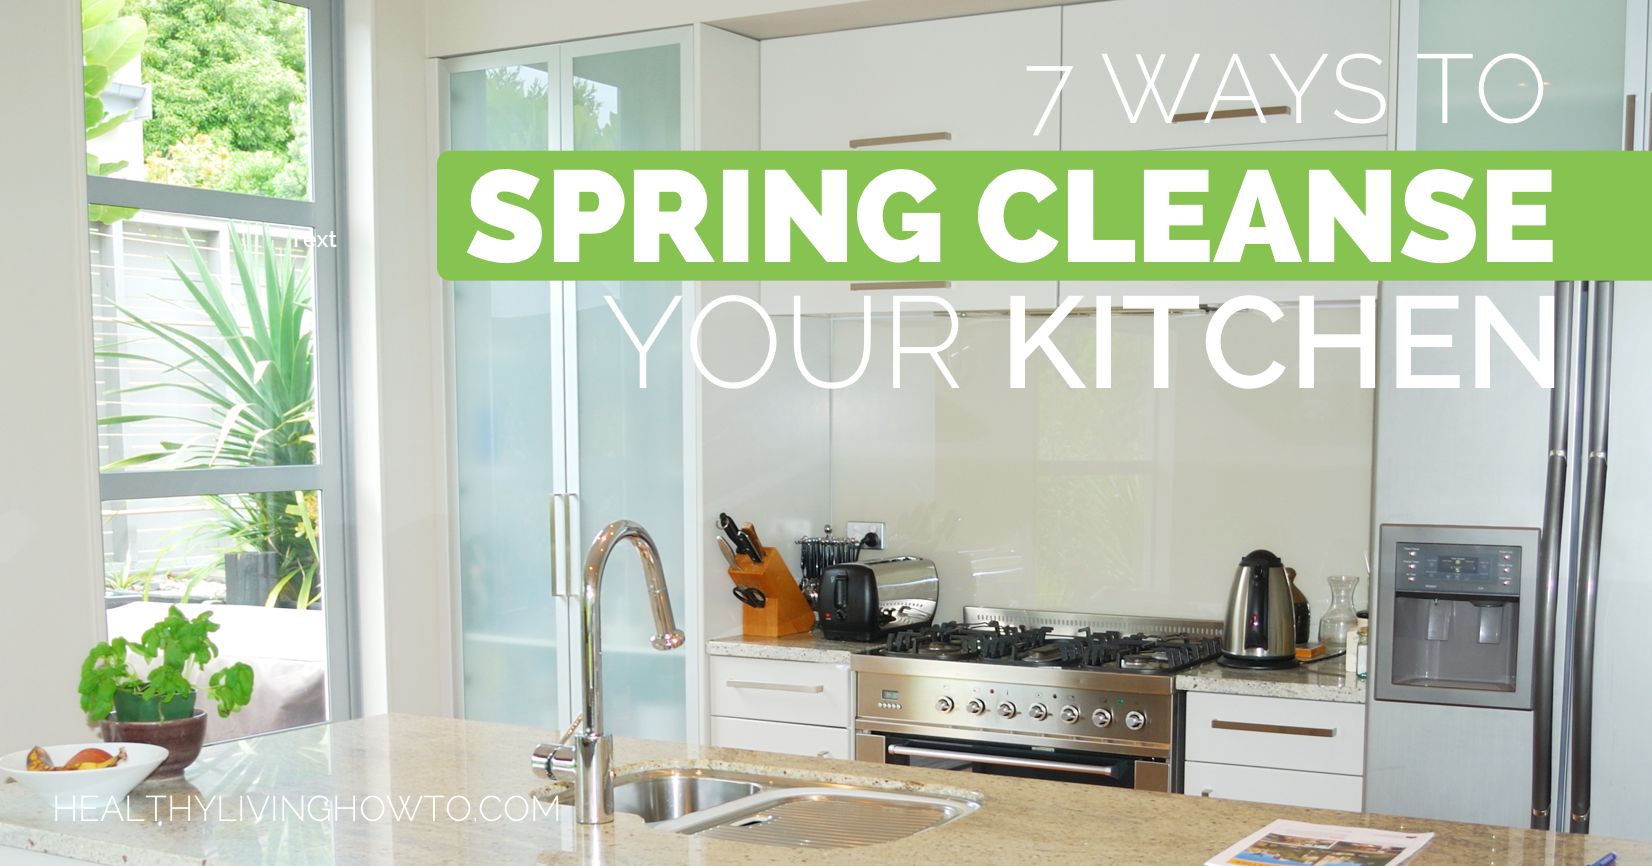 7 Ways To Spring Cleanse Your Kitchen | healthylivinghowto.com